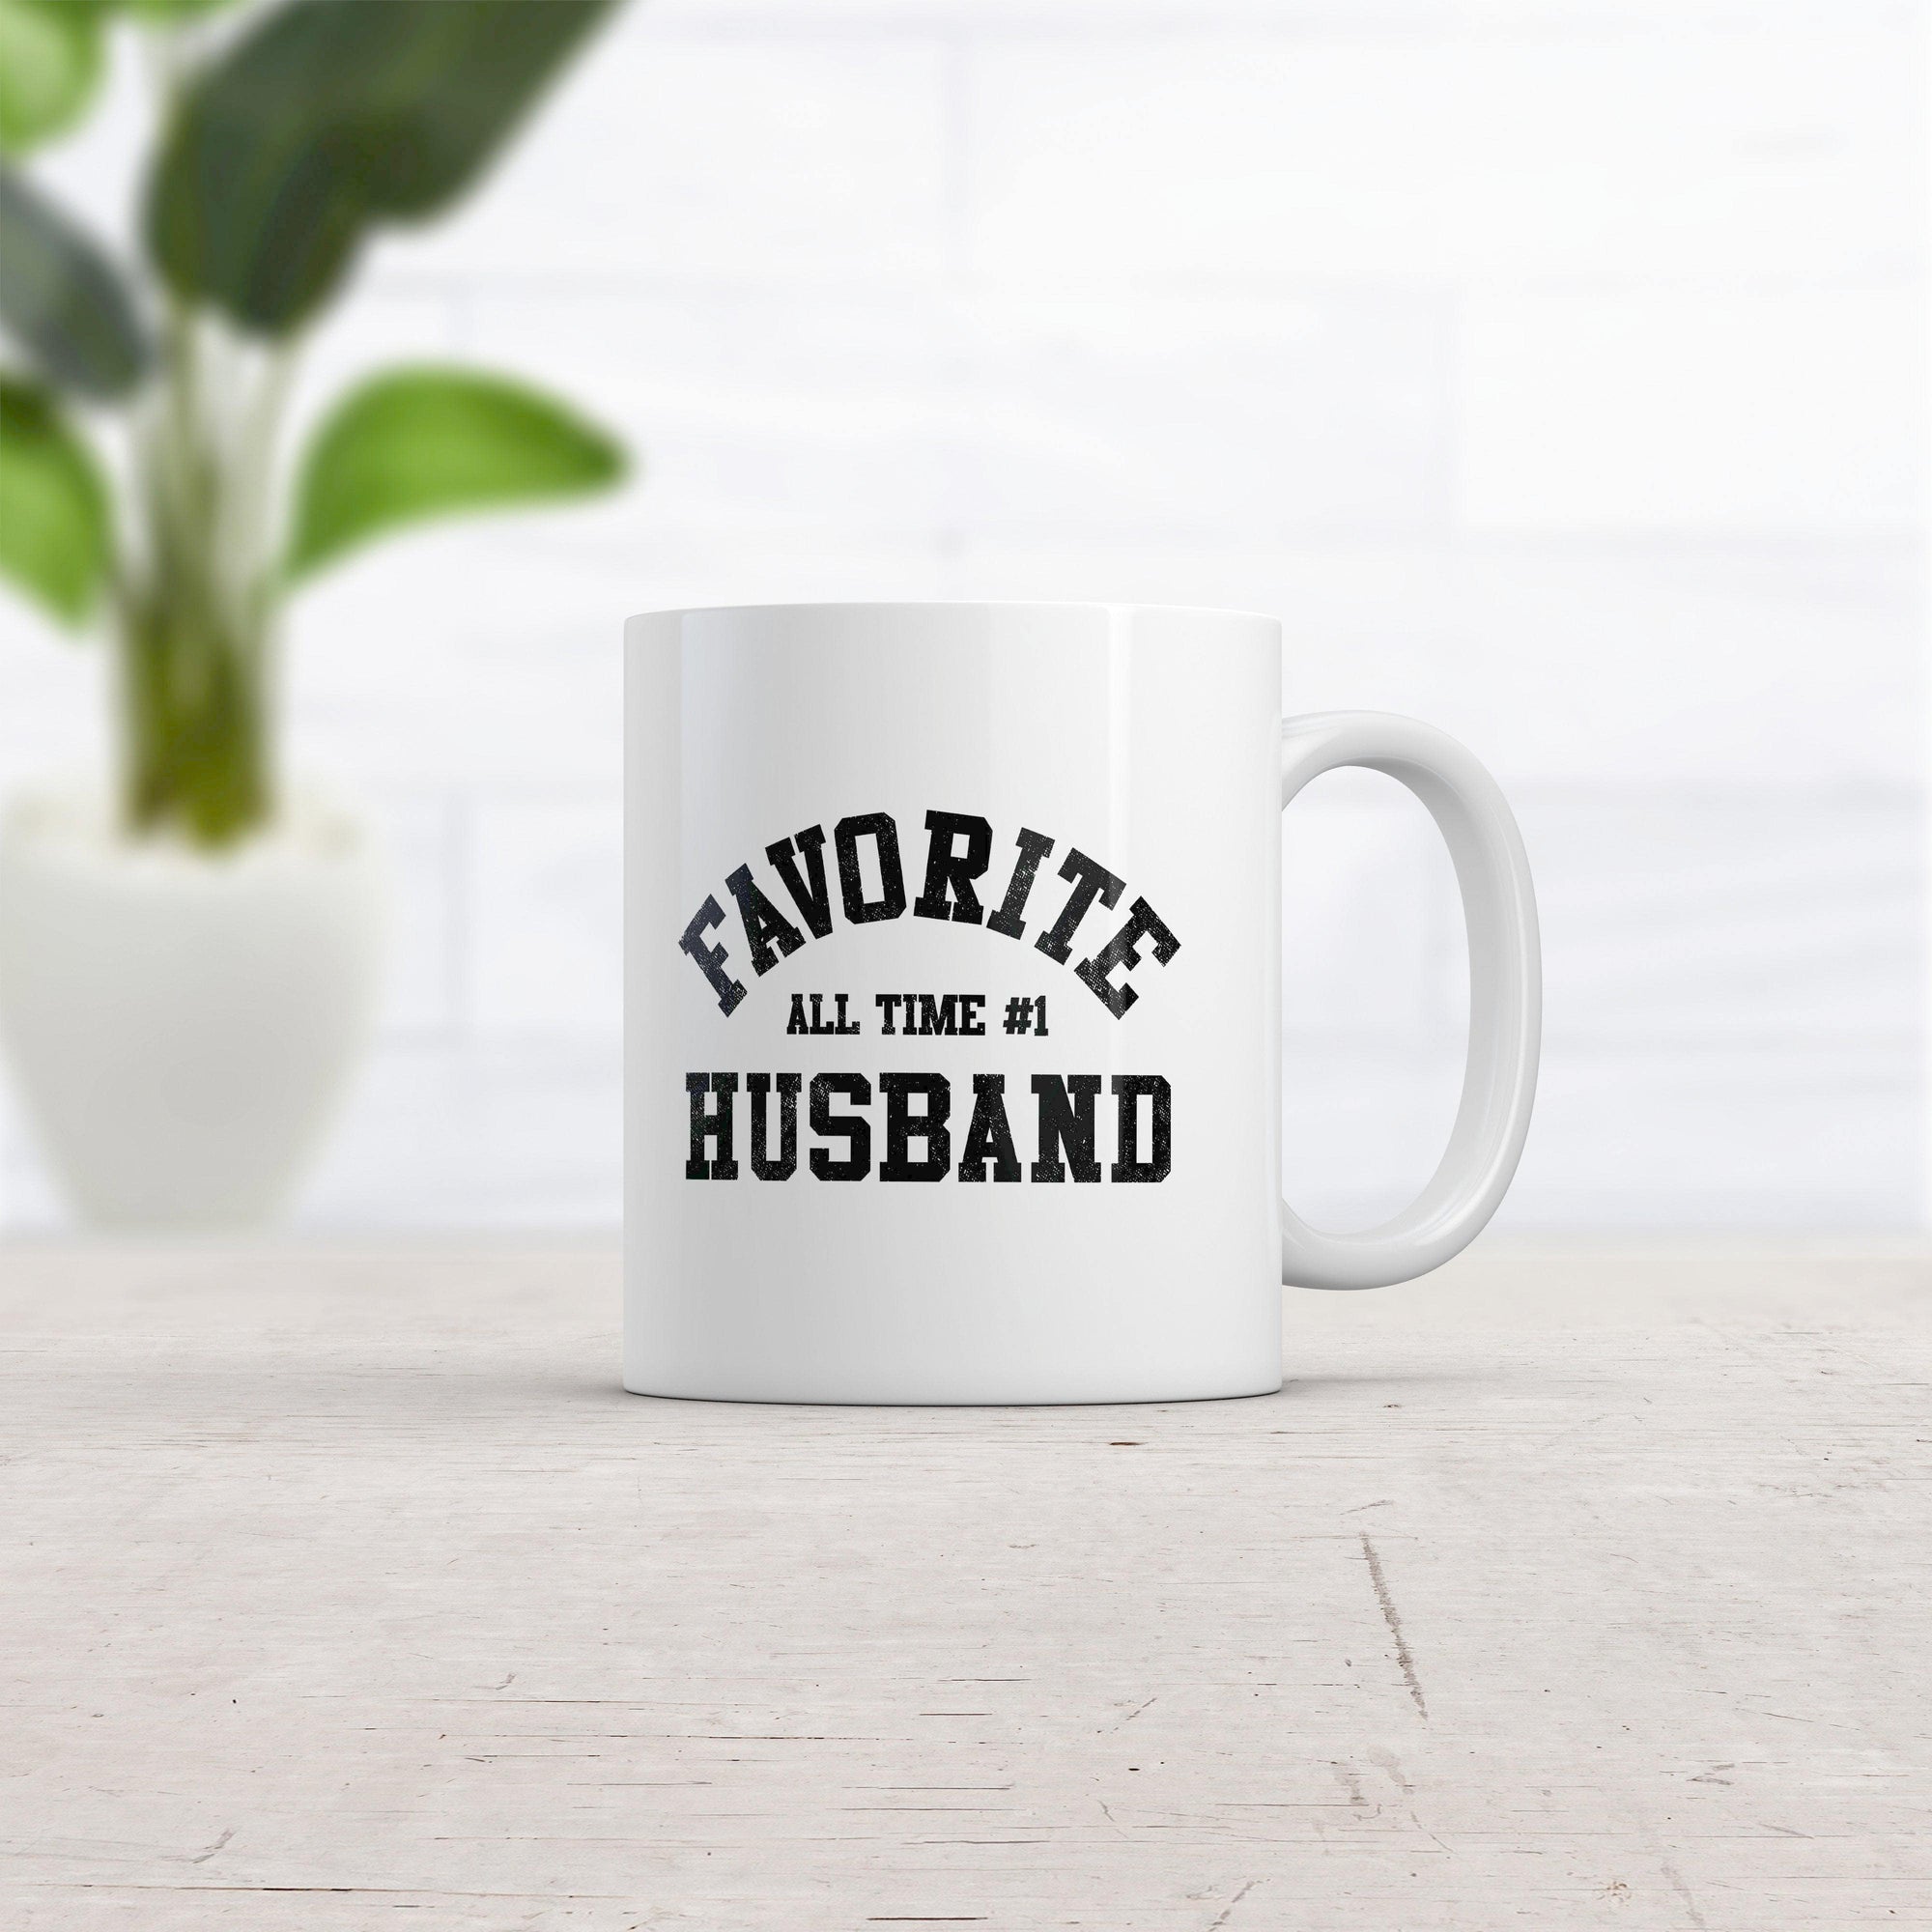 Favorite All Time Husband Mug Funny Sarcastic Married Graphic Novelty Coffee Cup-11oz  -  Crazy Dog T-Shirts